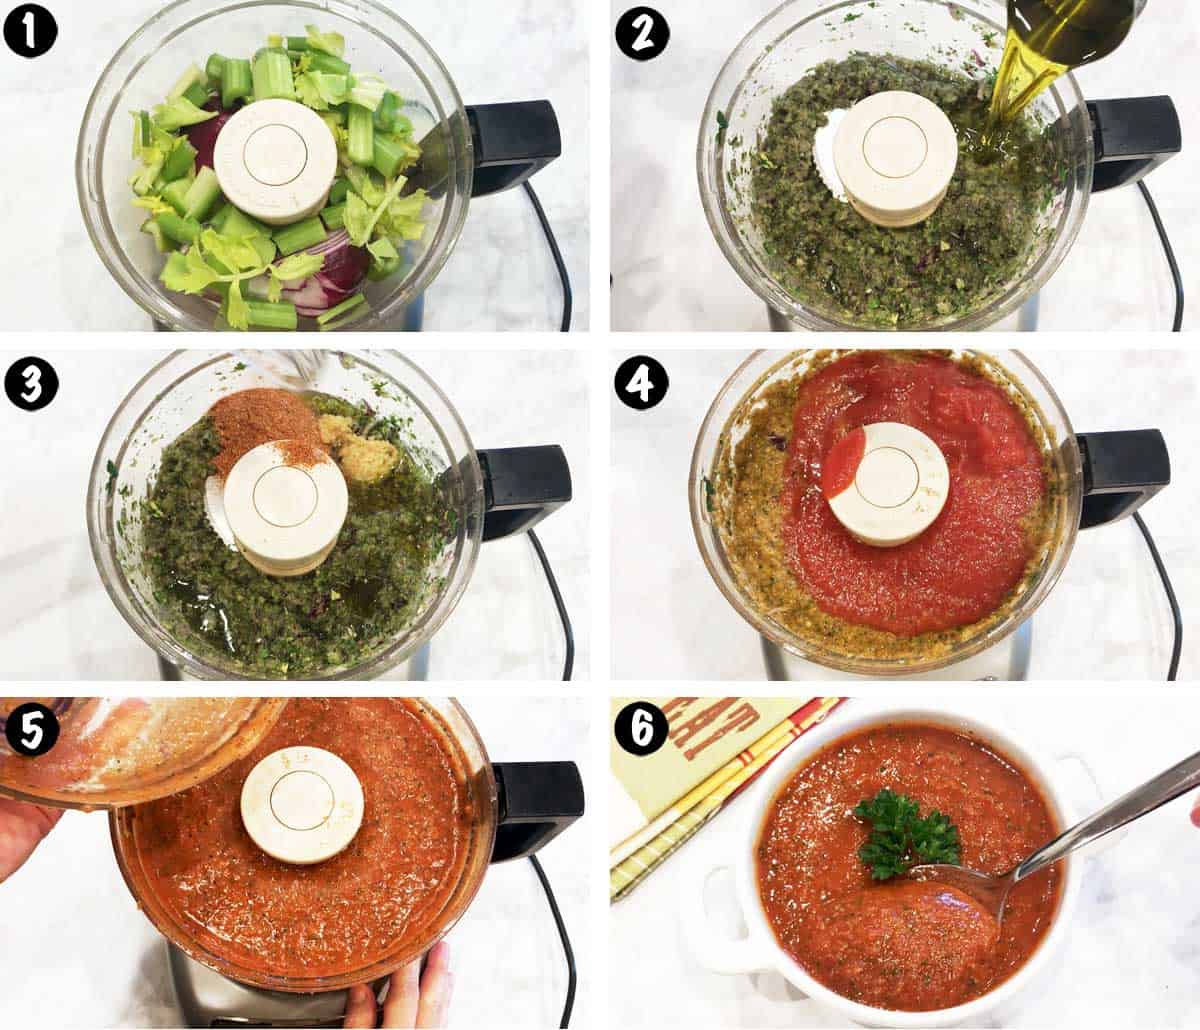 A six-photo collage showing the steps for making gazpacho. 